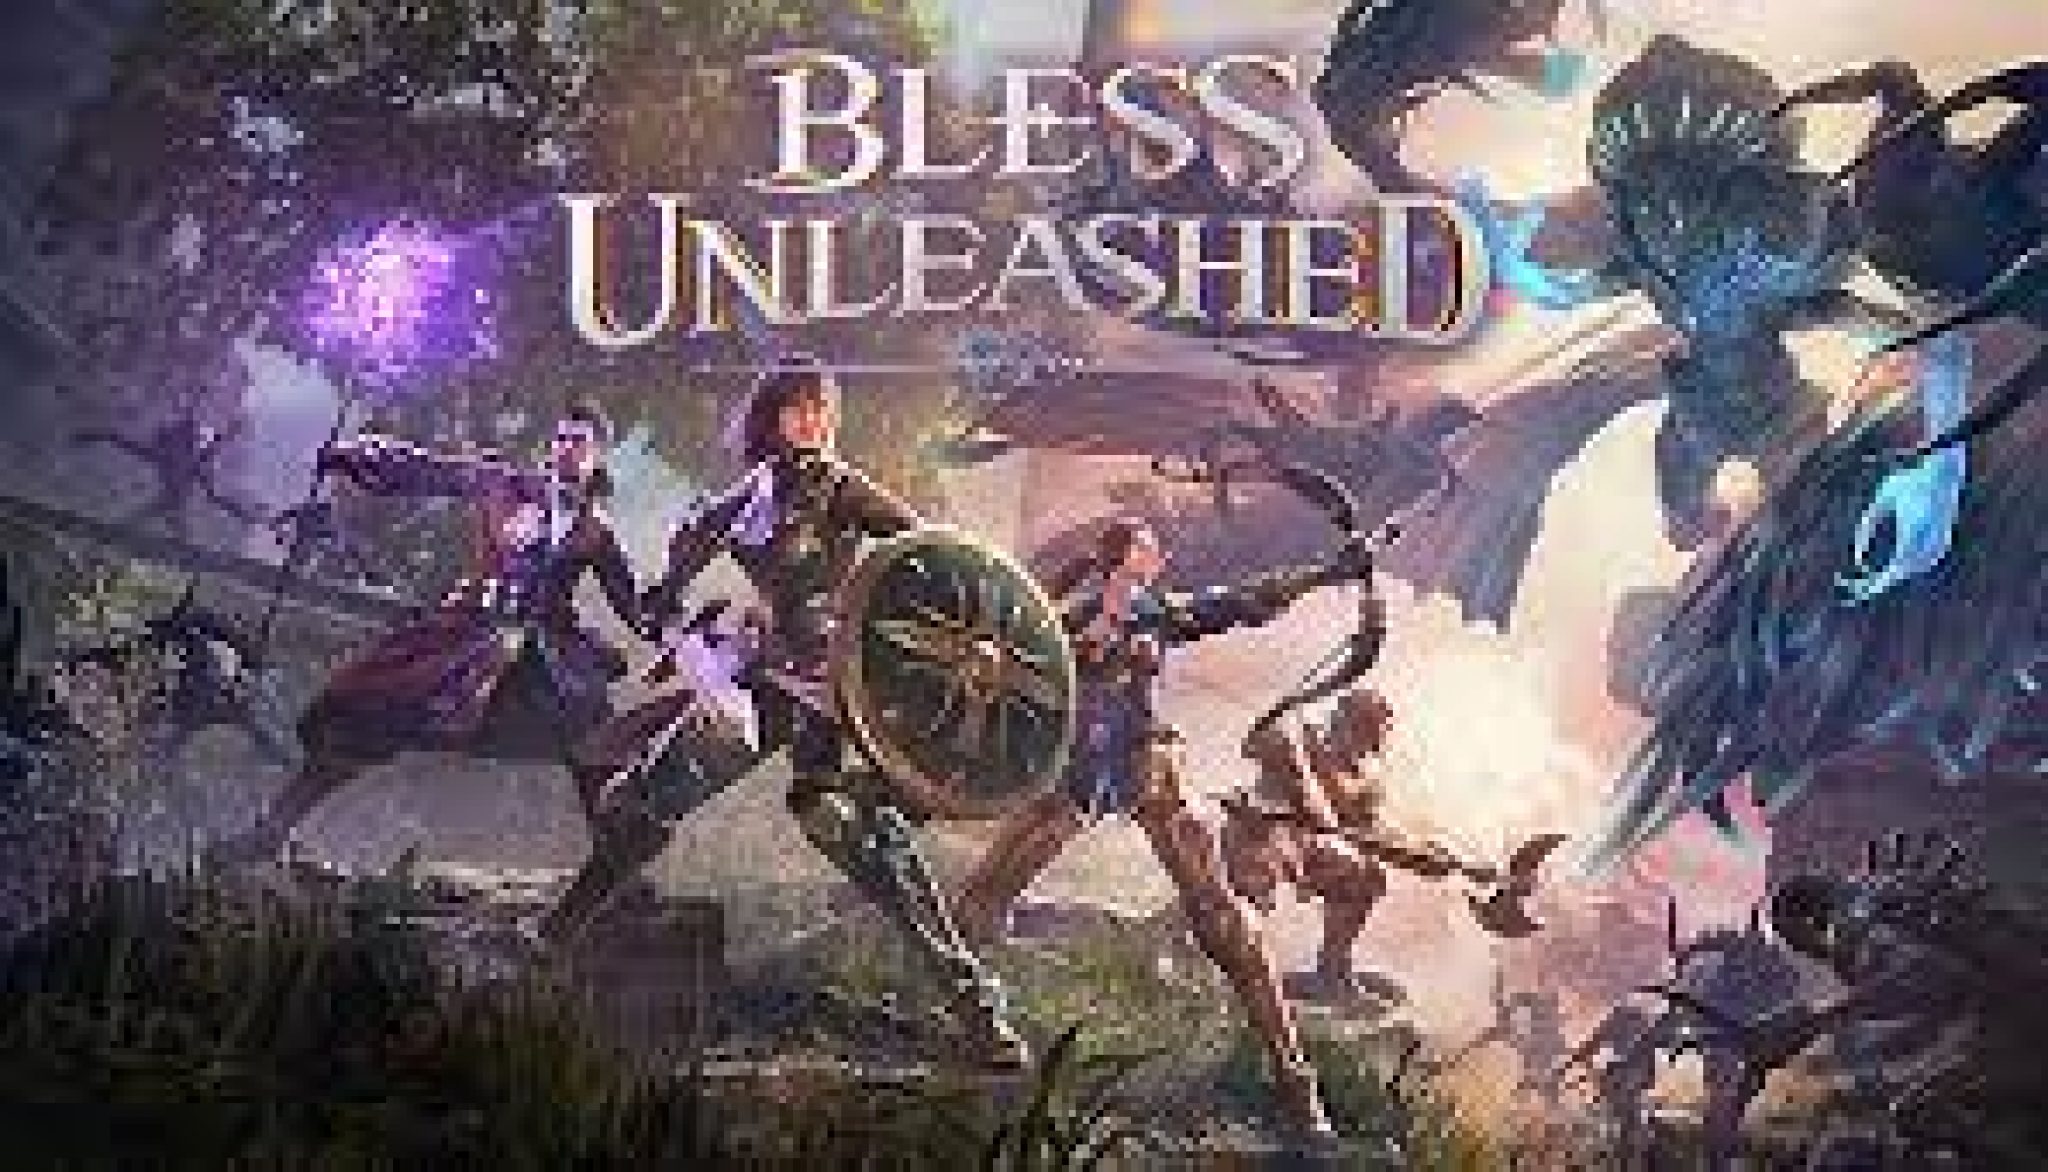 bless unleashed pc download